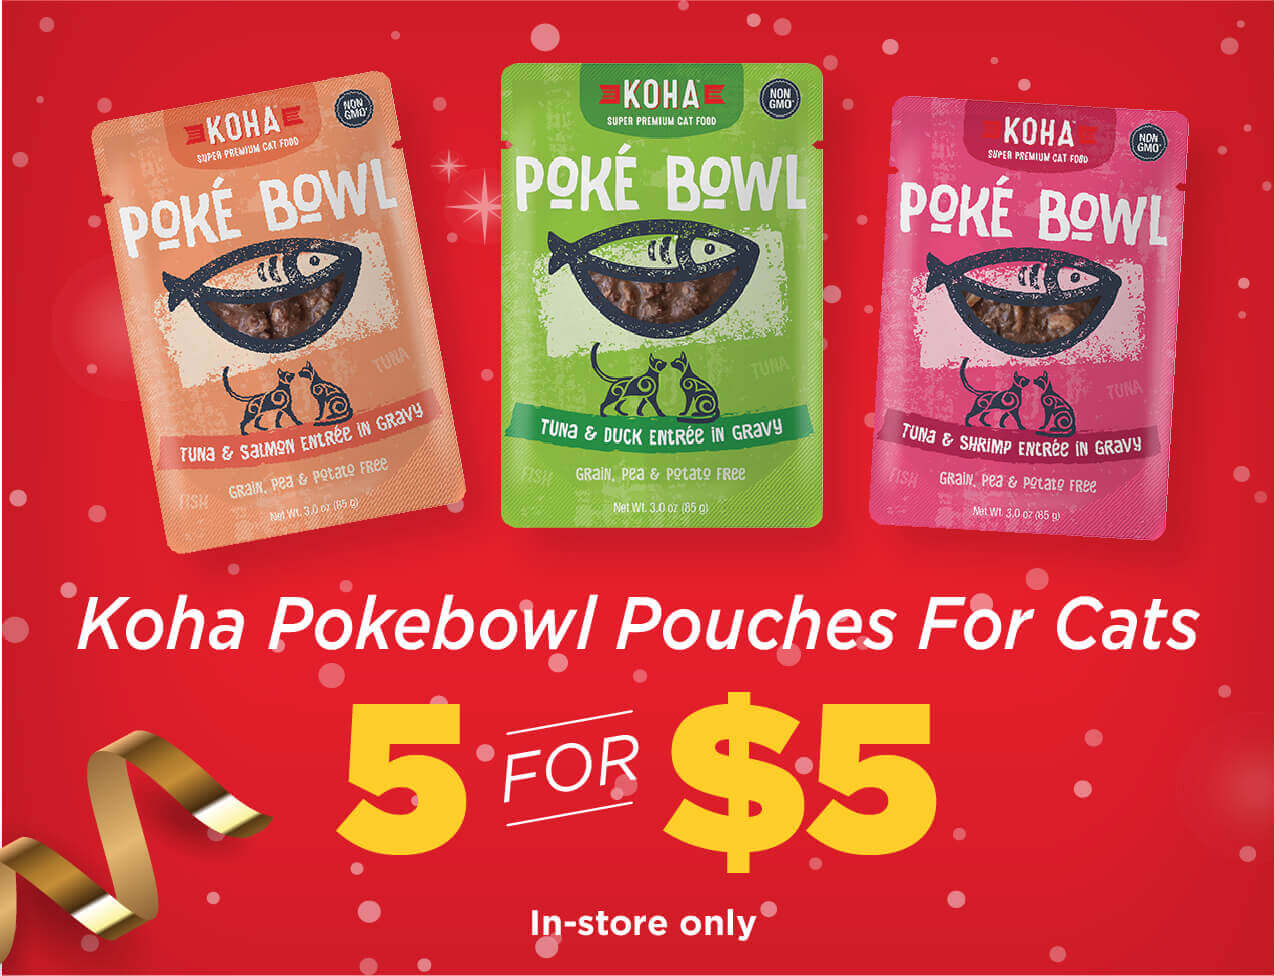 Koha Poke Bowl Pouches for Cats are 5 for $5 - In Store Only